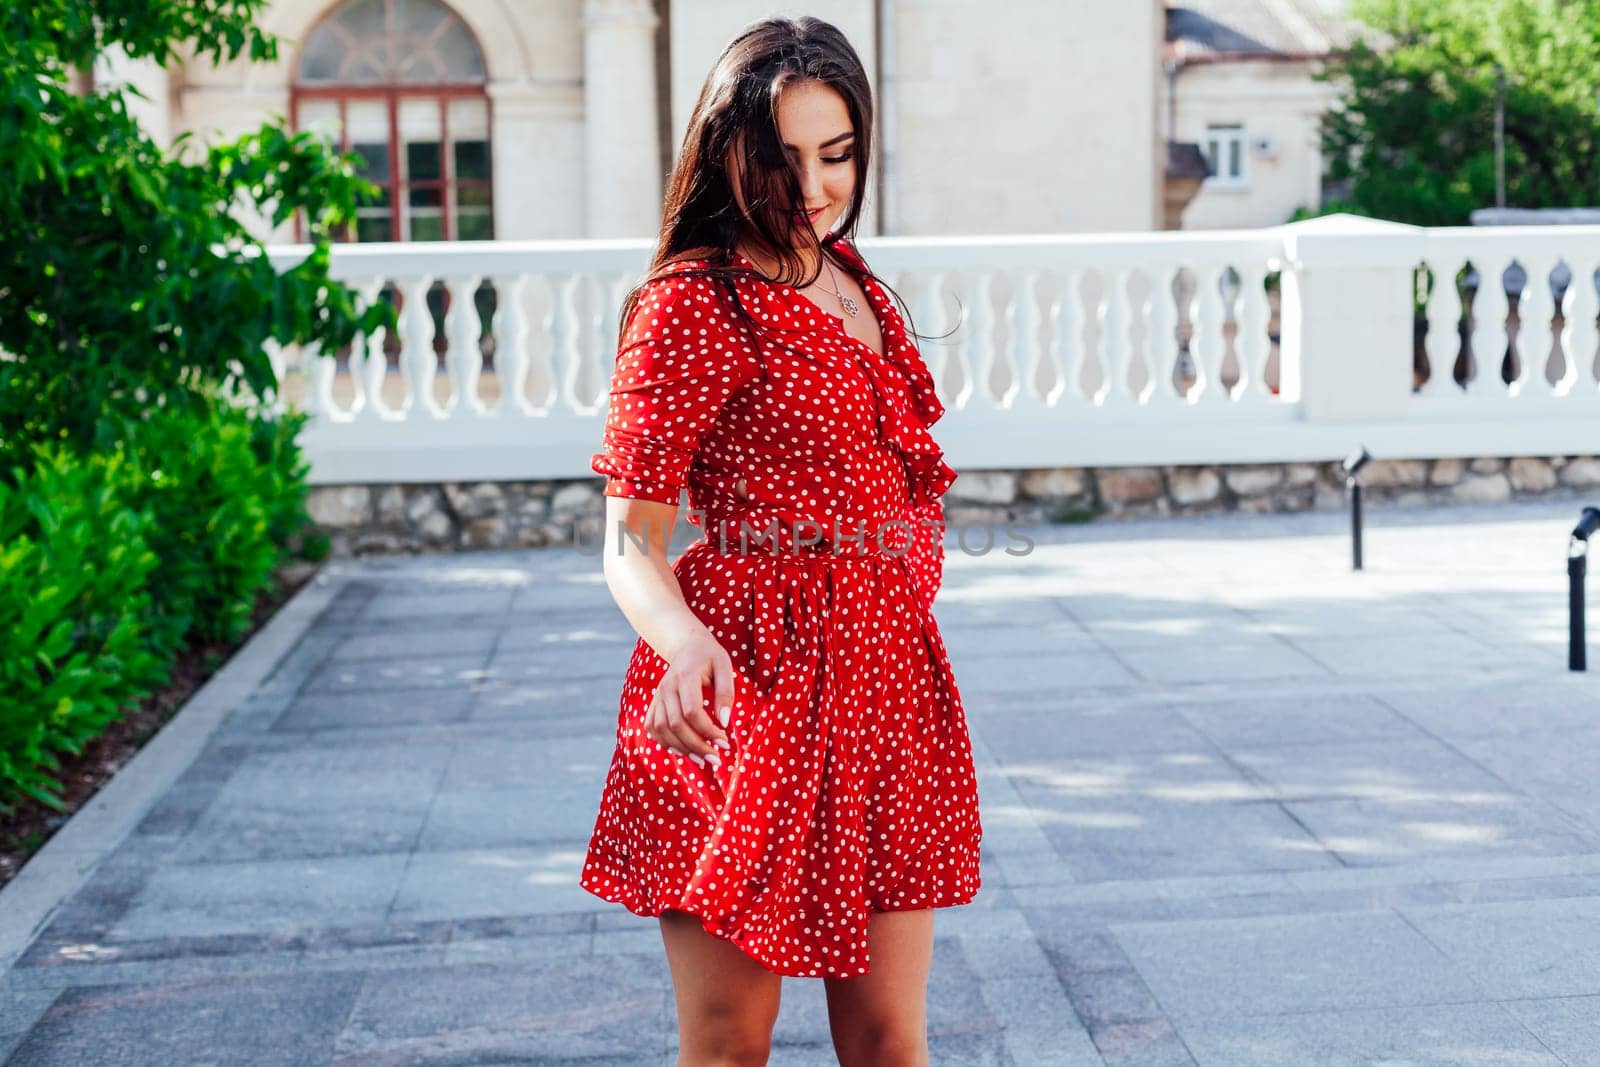 brunette woman in red polka dot dress walks the streets of the city